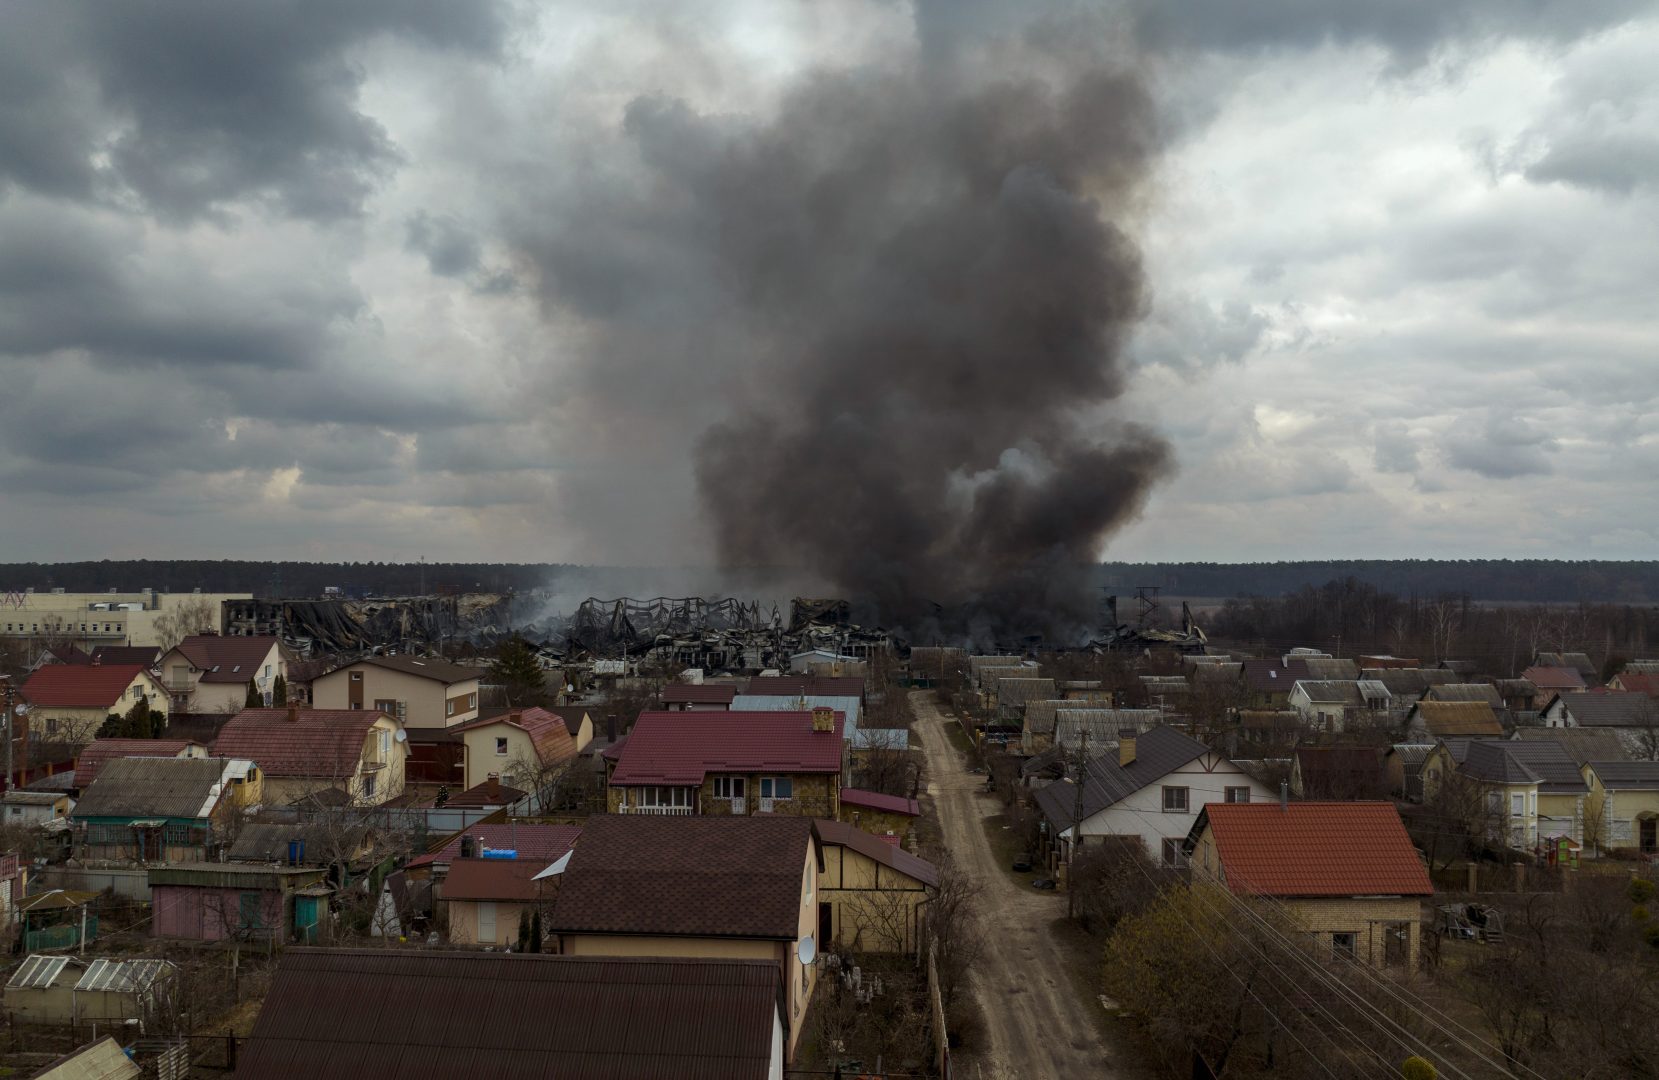 A factory and a store burn after being bombarded in Irpin, on the outskirts of Kyiv, Ukraine, Sunday, March 6, 2022. (AP Photo/Emilio Morenatti)